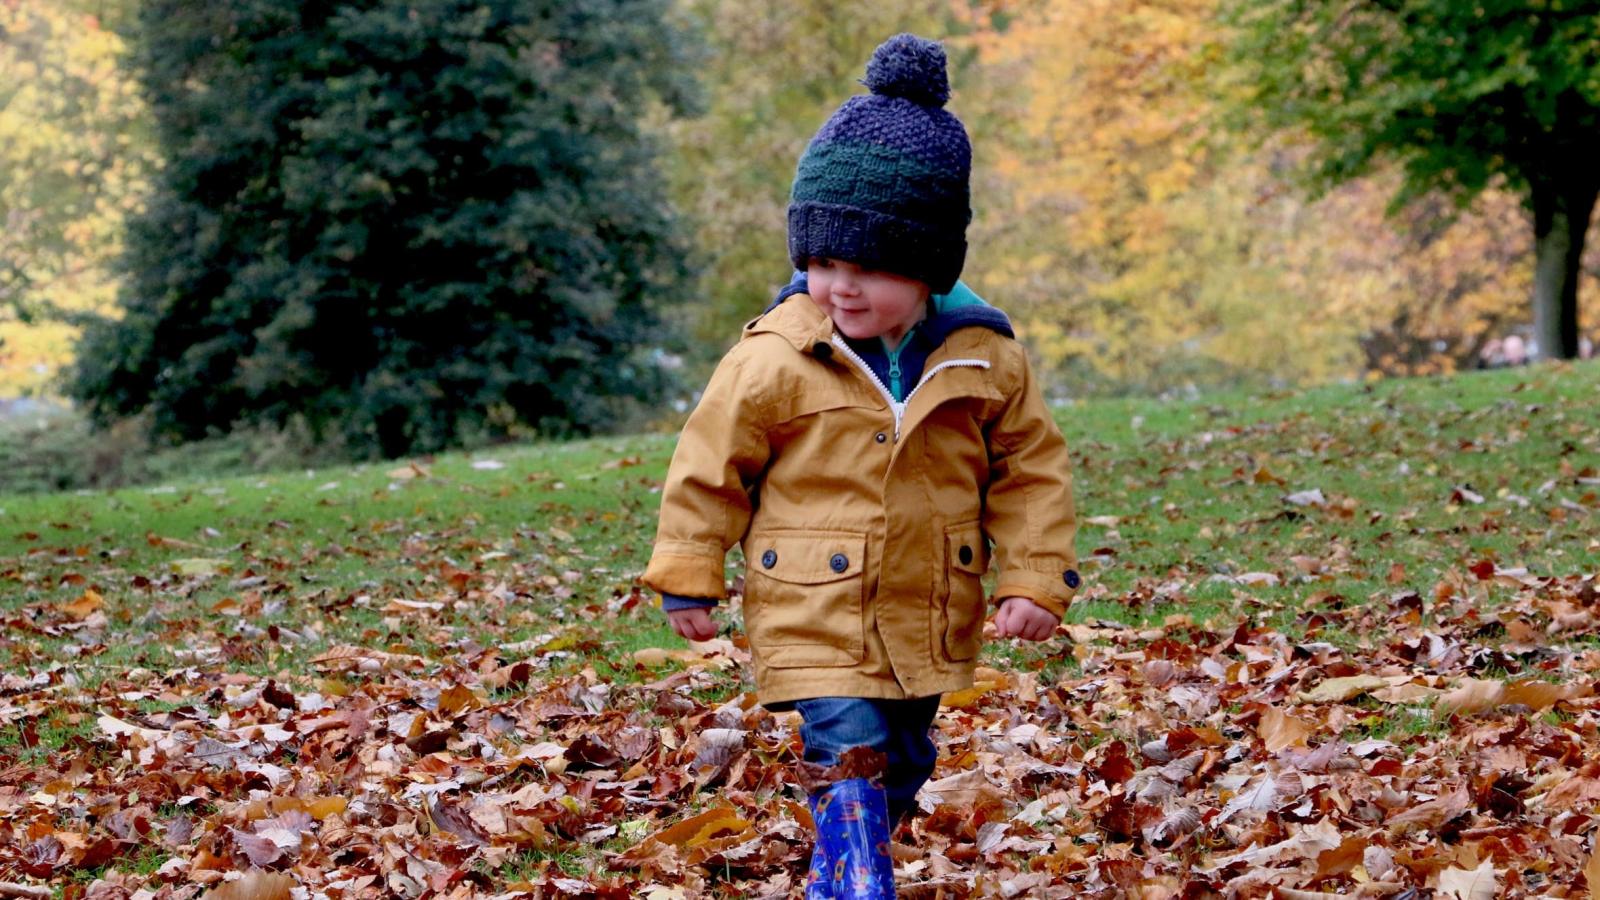 Toddler with wooly hat, rain jacket and rain boots walking in autumn leaves in a park